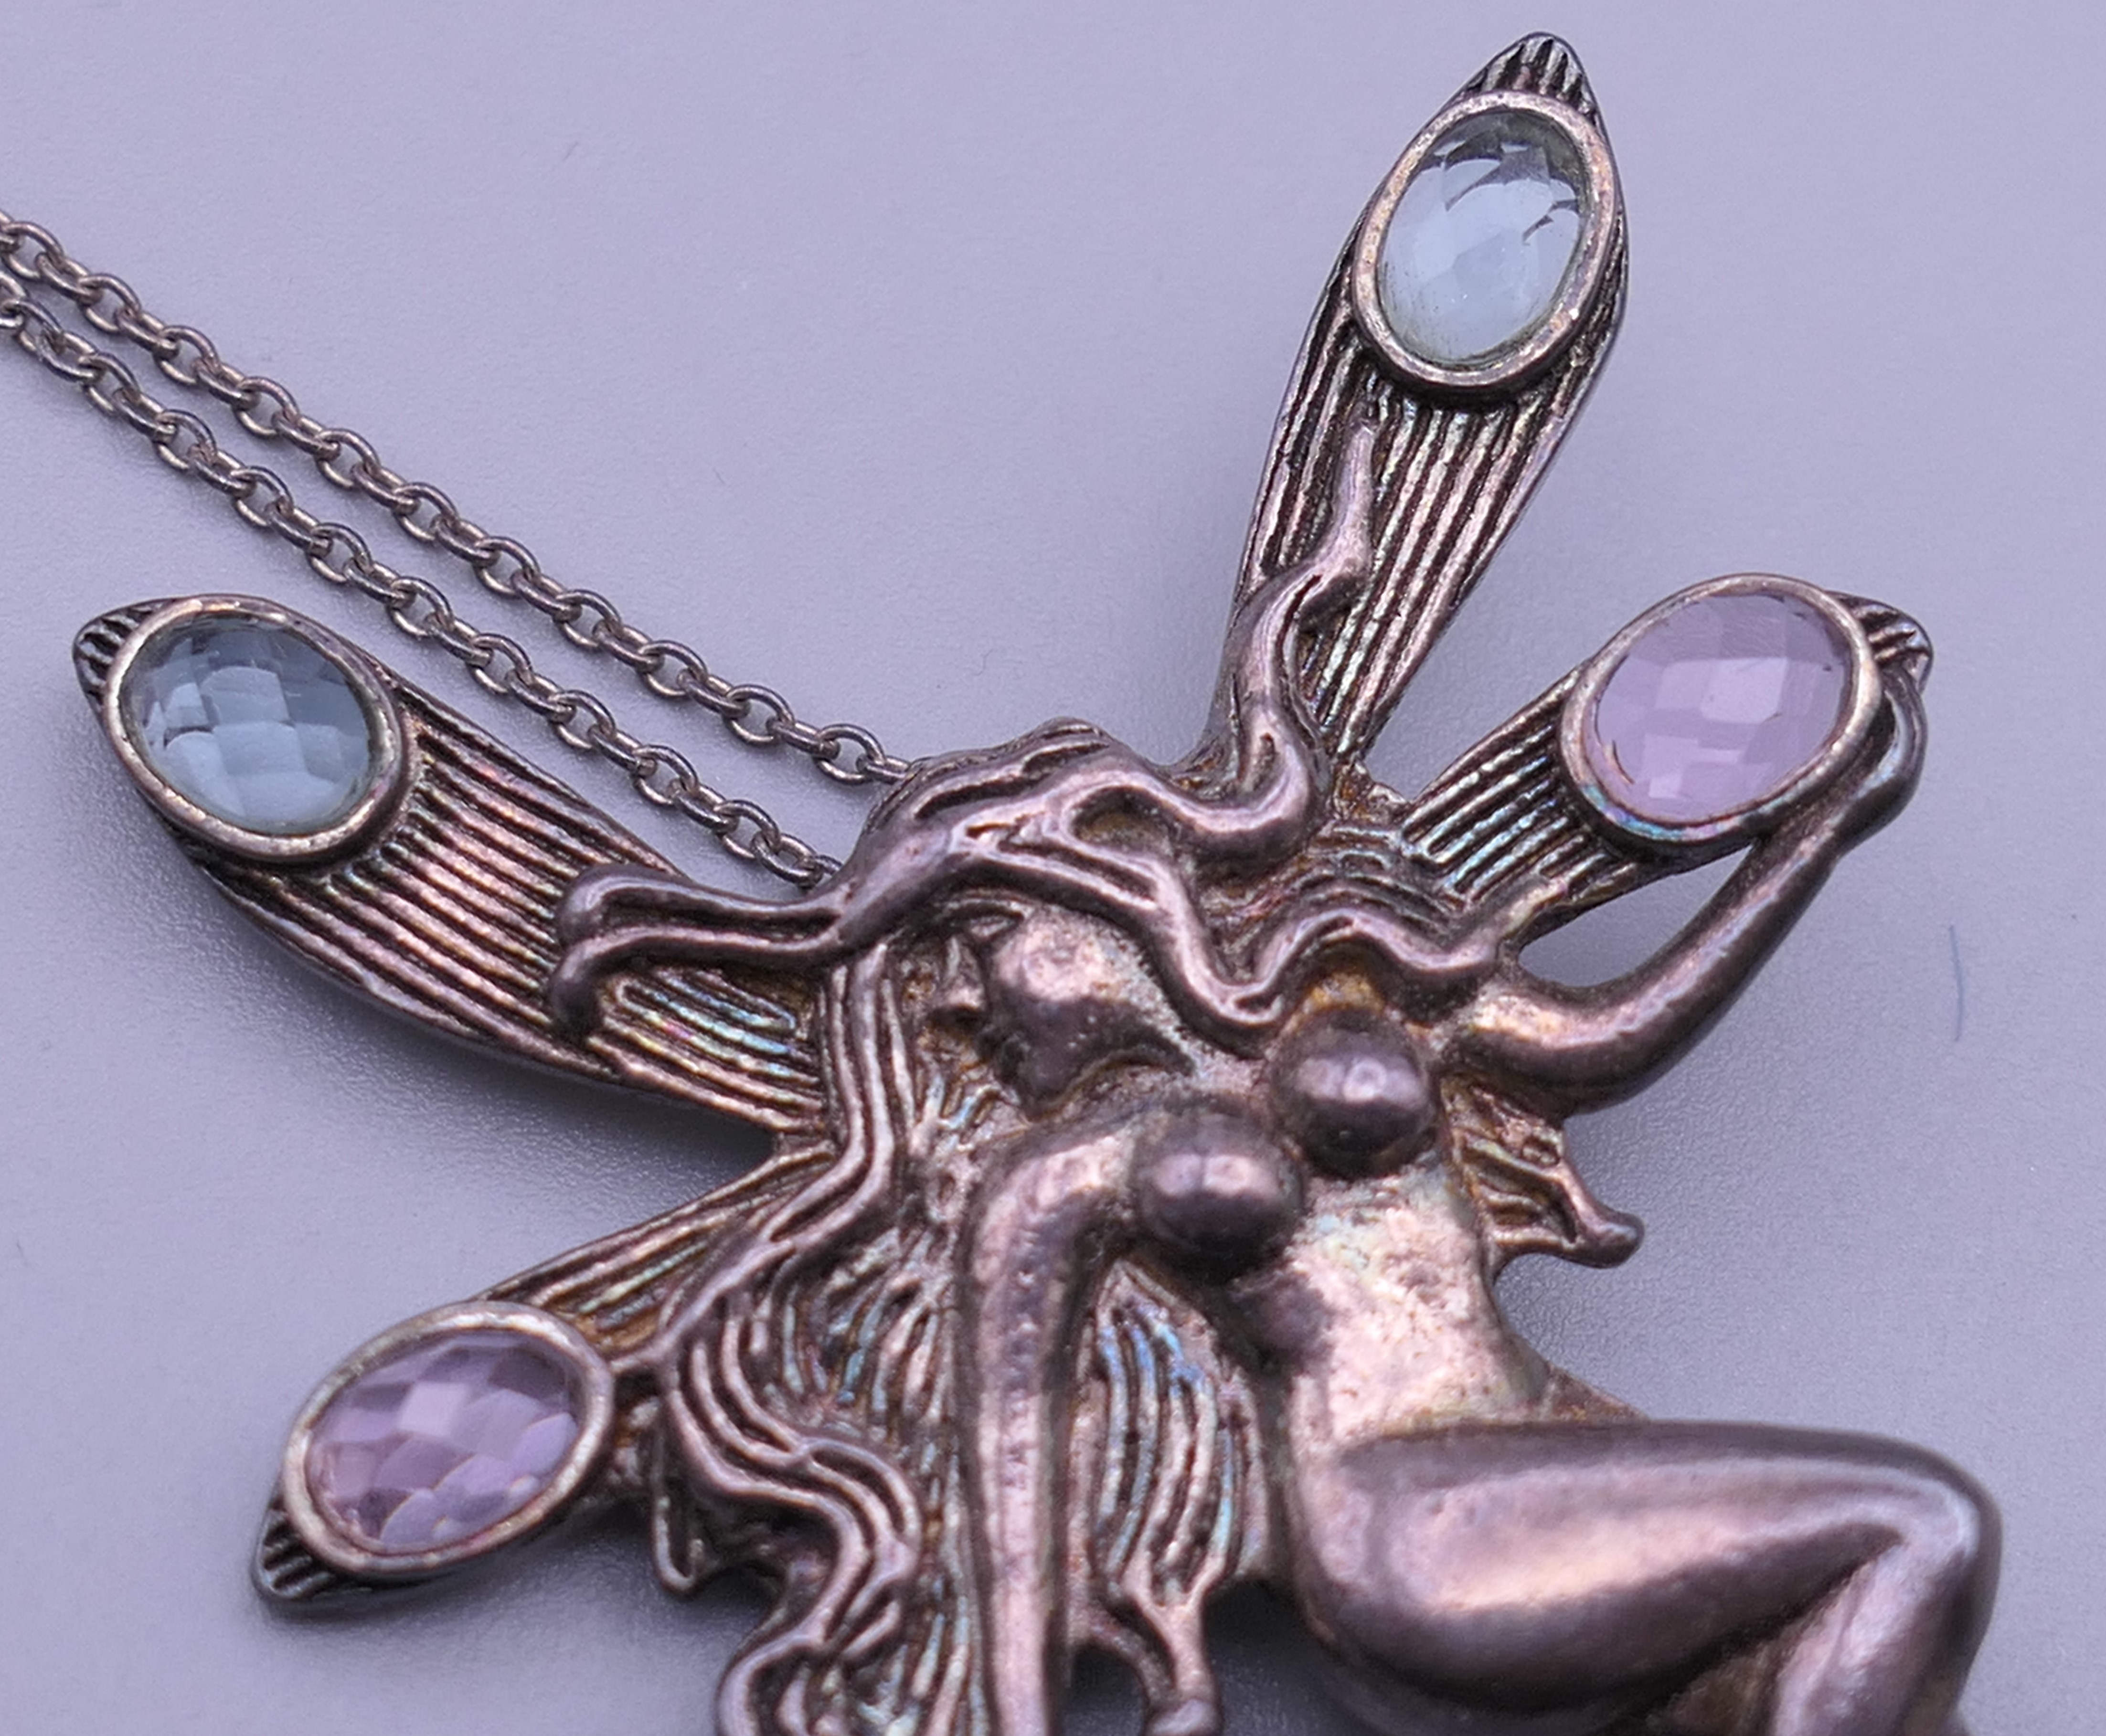 An Ortak 925 silver fairy formed pendant and chain. 6.5 cm high. - Image 4 of 6